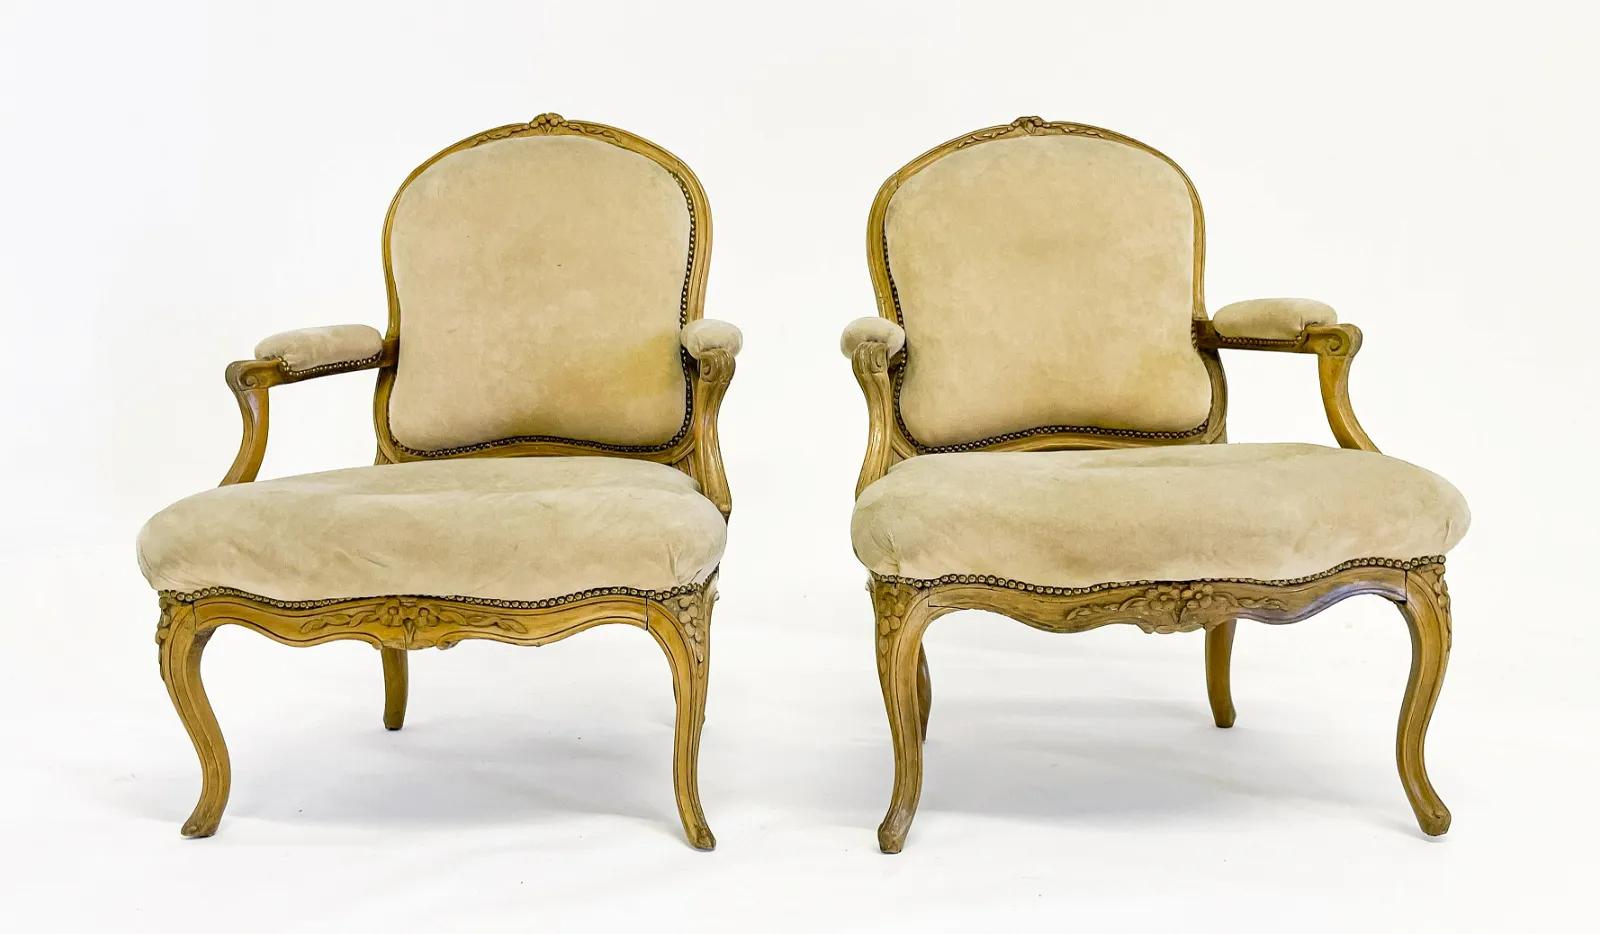 Hand-Carved Pair of French Louis XV Period Fauteuils, Circa 1760